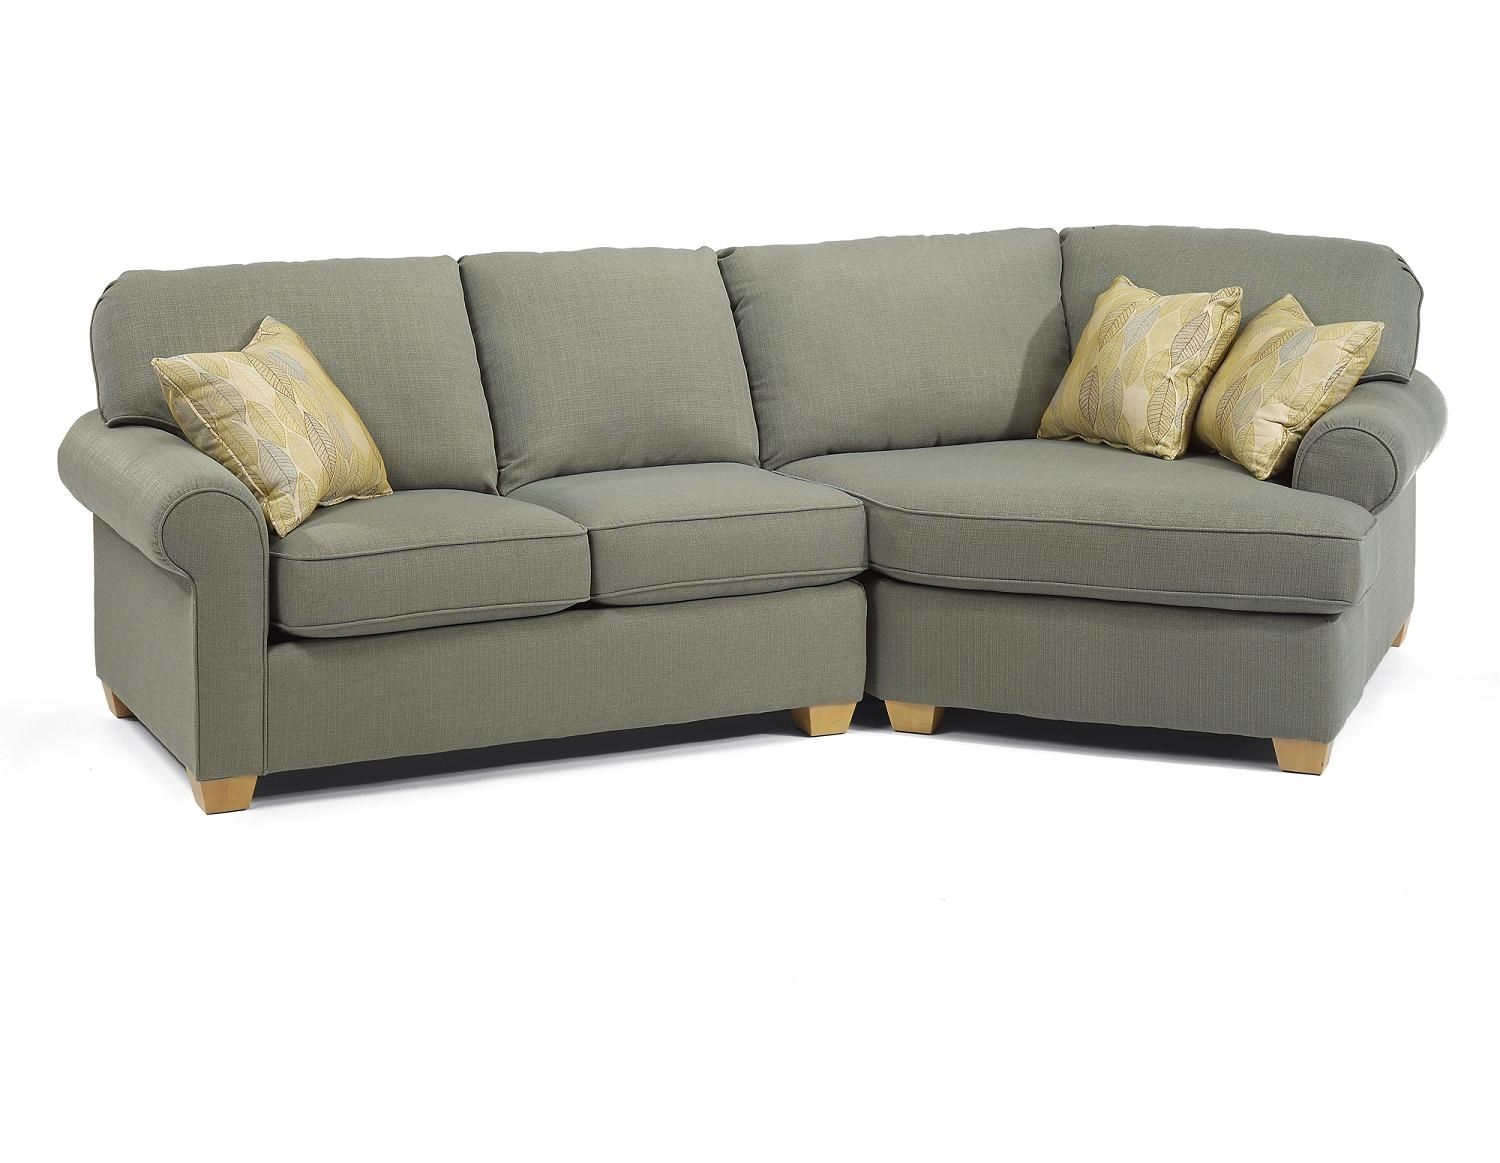 Angled Chaise Sofa – Plymouth Furniture Inside Angled Chaise Sofas (View 1 of 10)